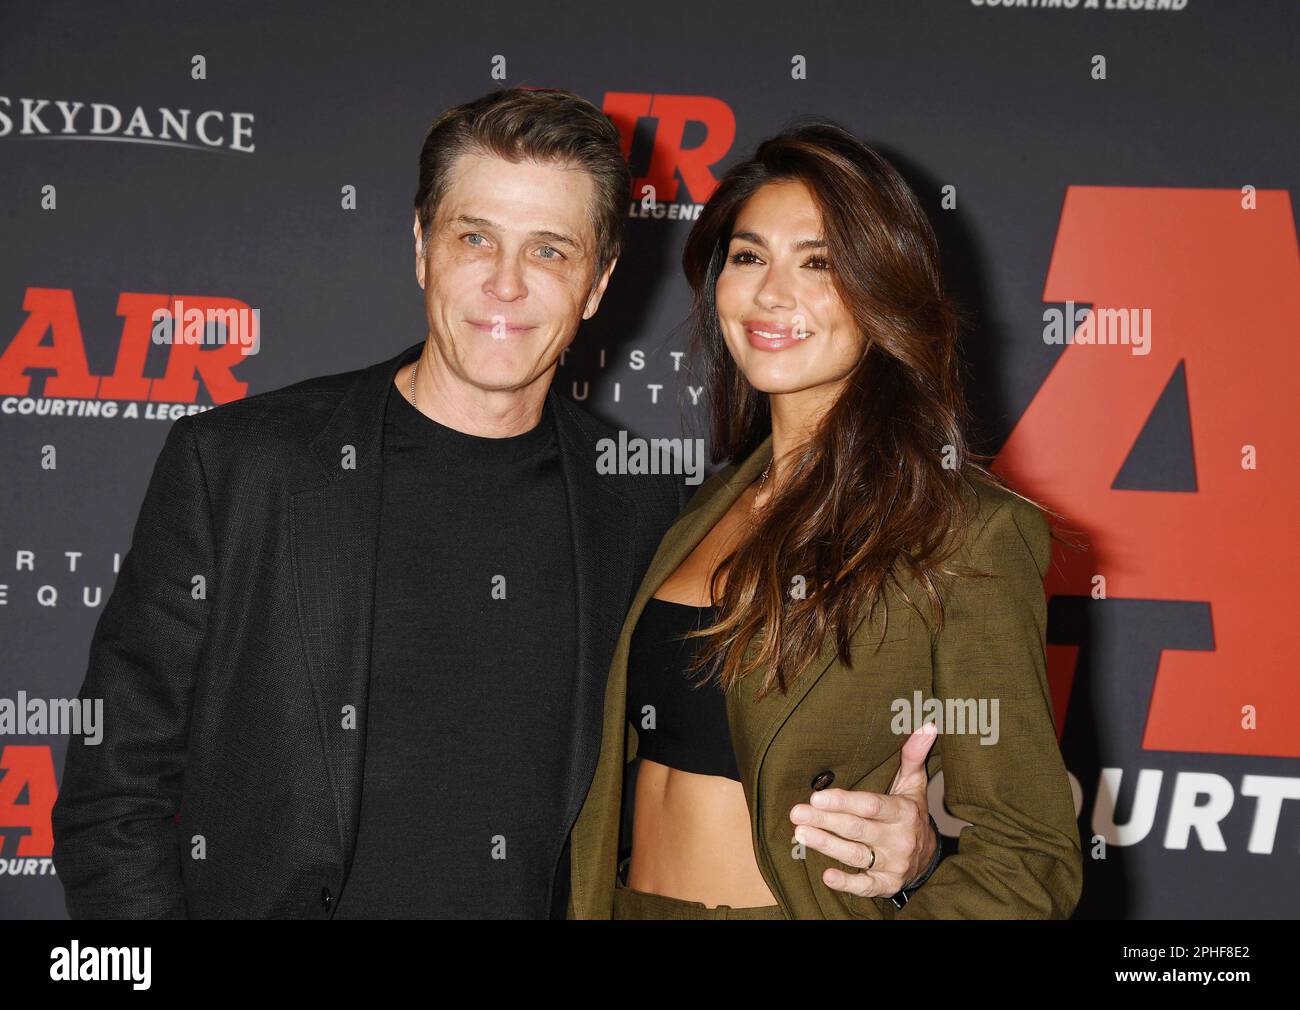 LOS ANGELES, CALIFORNIA - MARCH 27: (L-R) Patrick Whitesell and Pia Miller Whitsell attend Amazon Studios' World Premiere Of 'AIR' at Regency Village Stock Photo